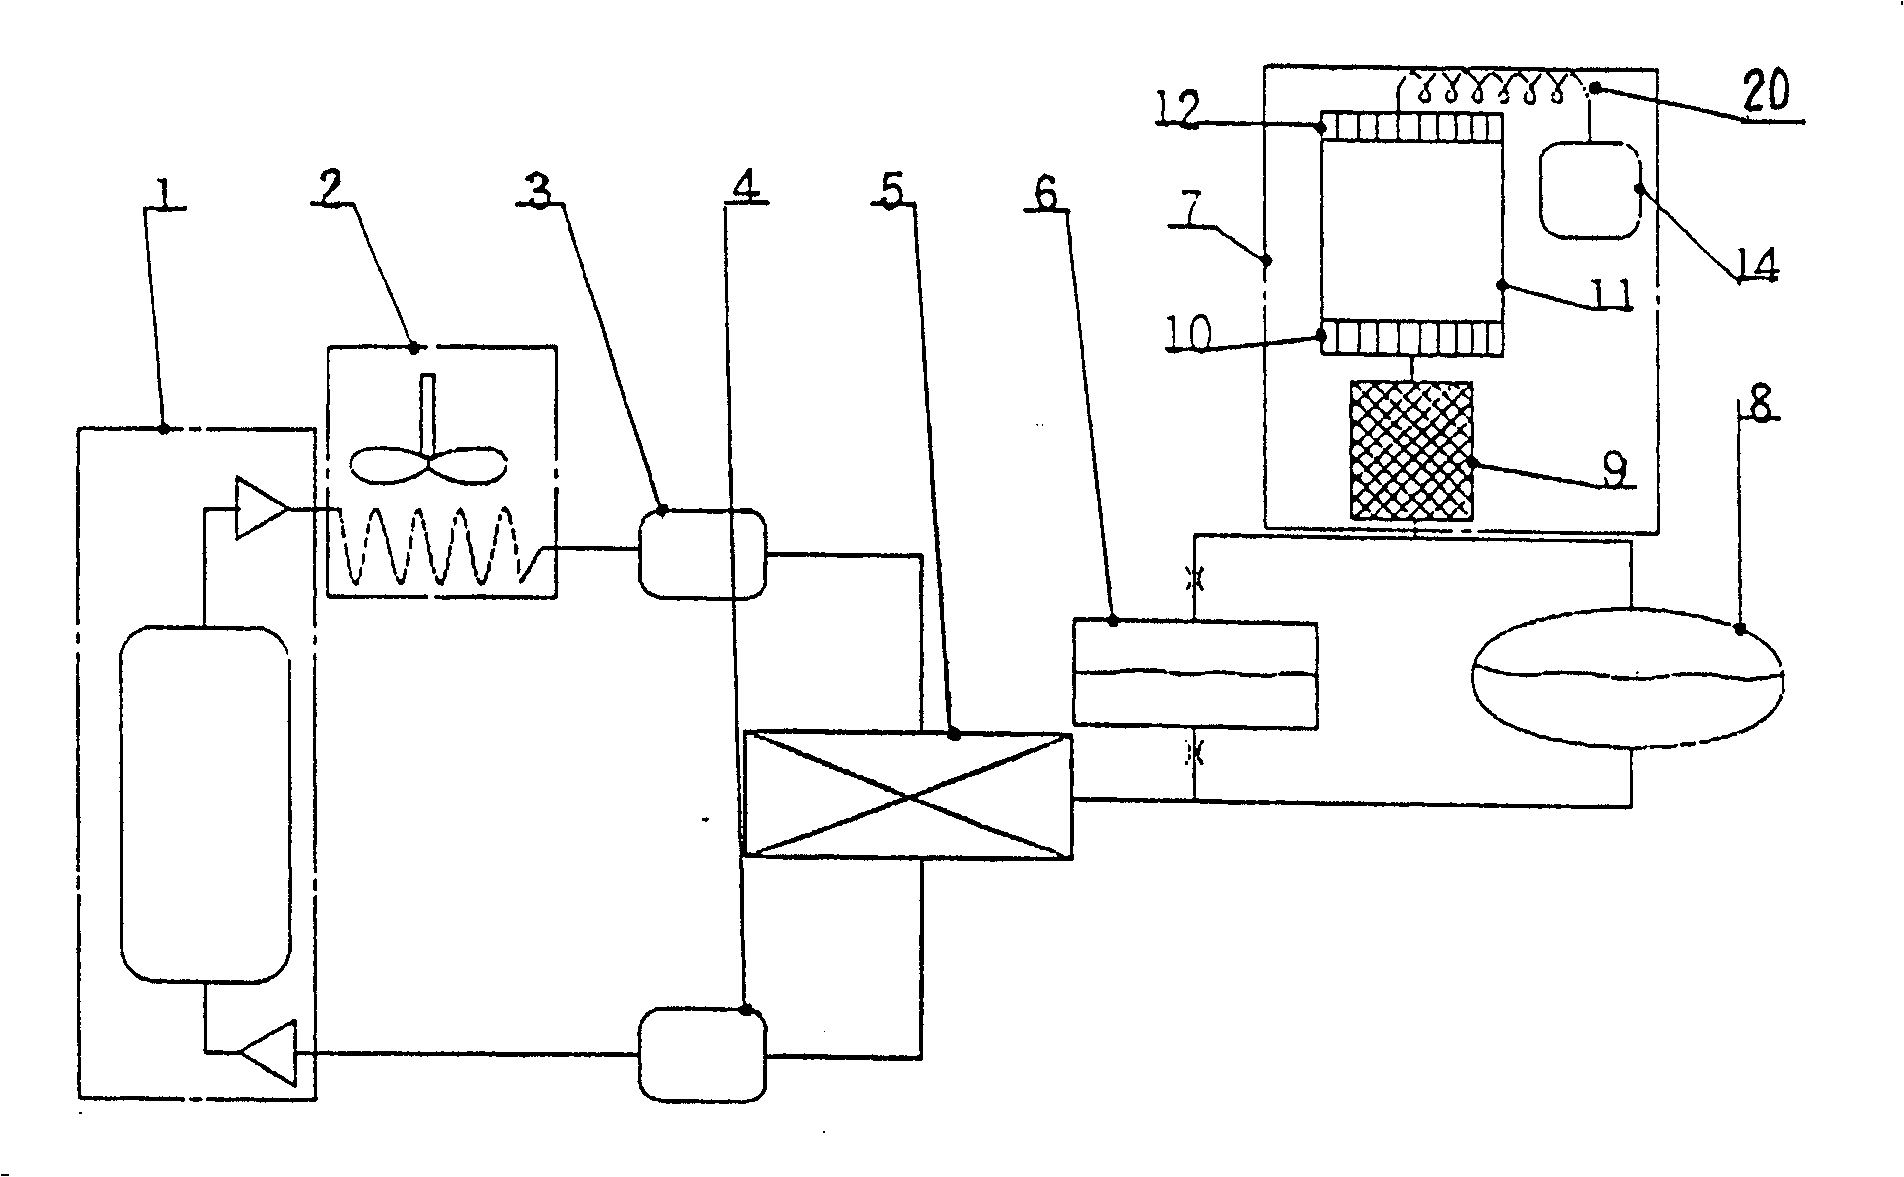 Oil lubrication compressor gas supplied circulating refrigerating device